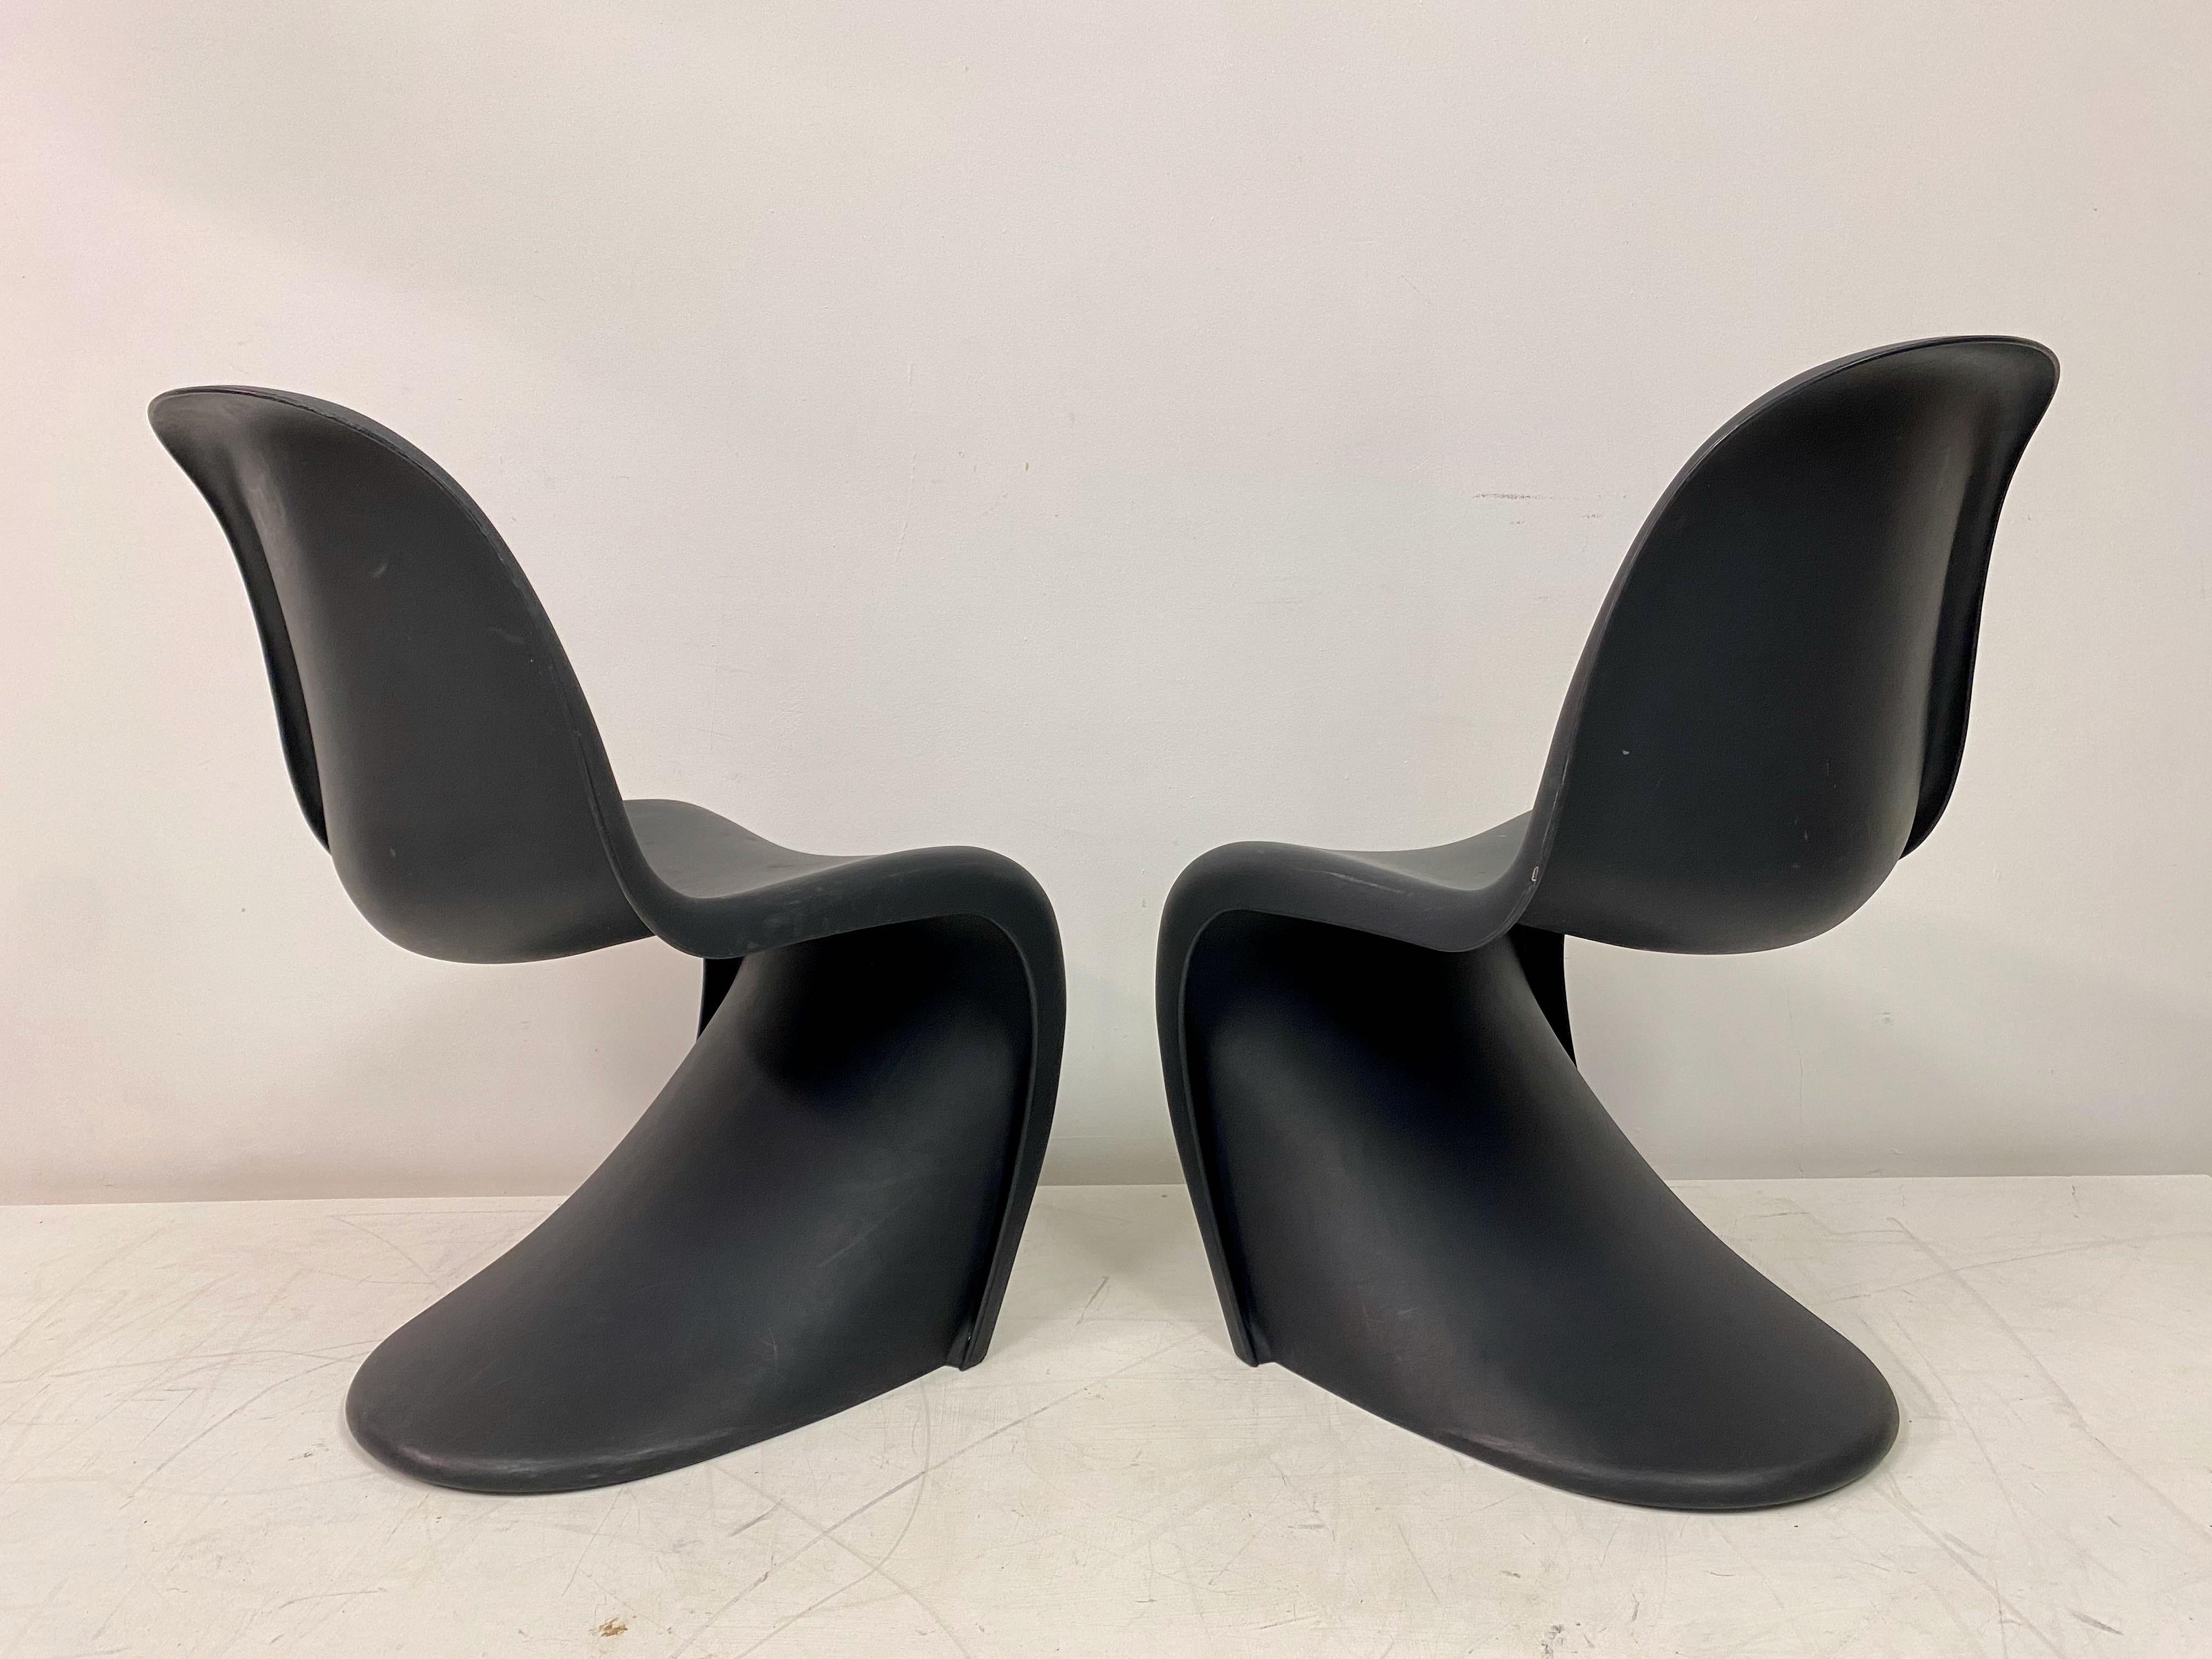 Large Group of Verner Panton S Chairs for Vitra 12